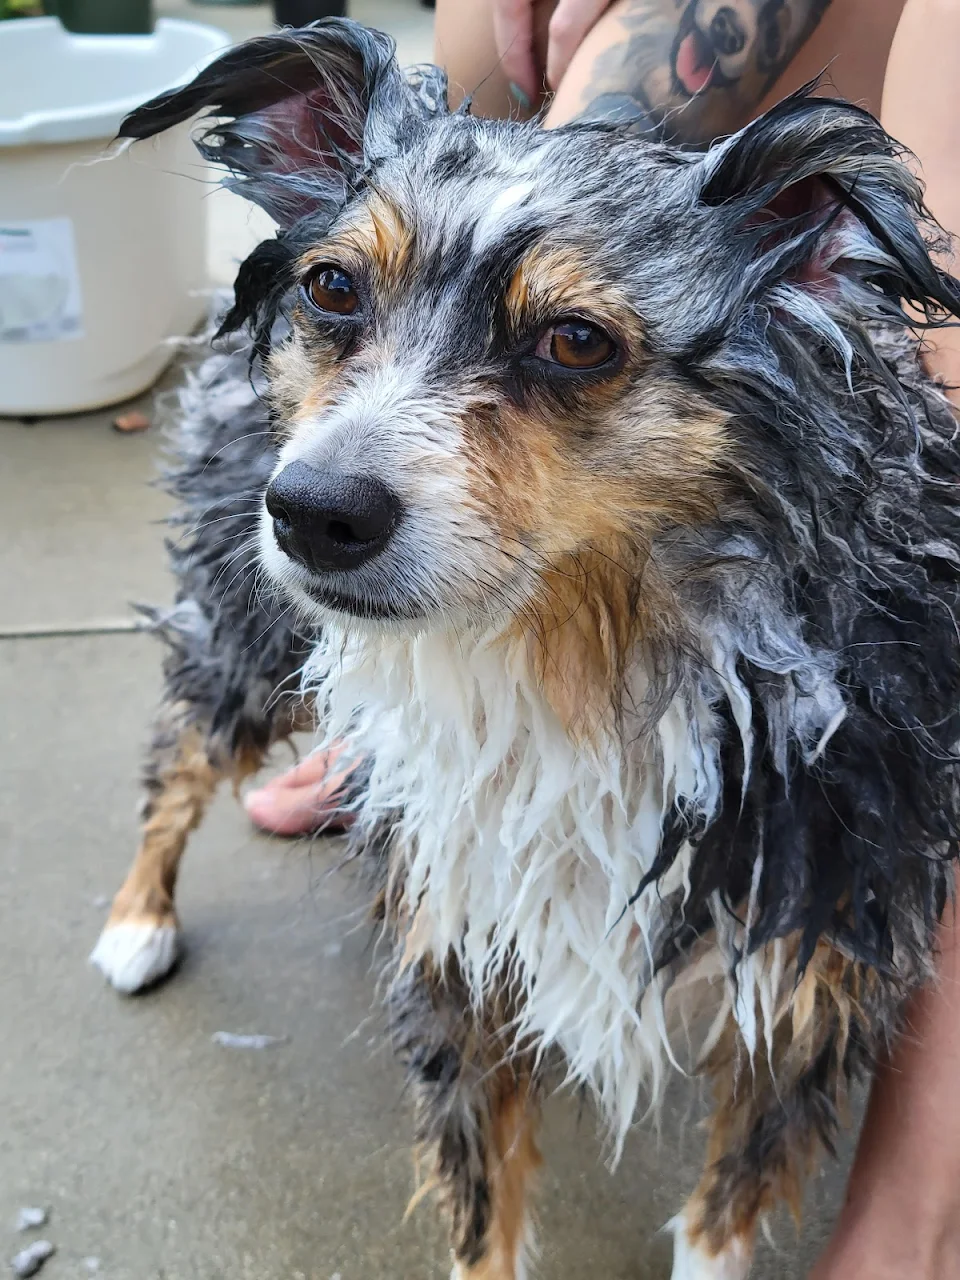 My poor skunked Oscar's look of indignation after his third bath.